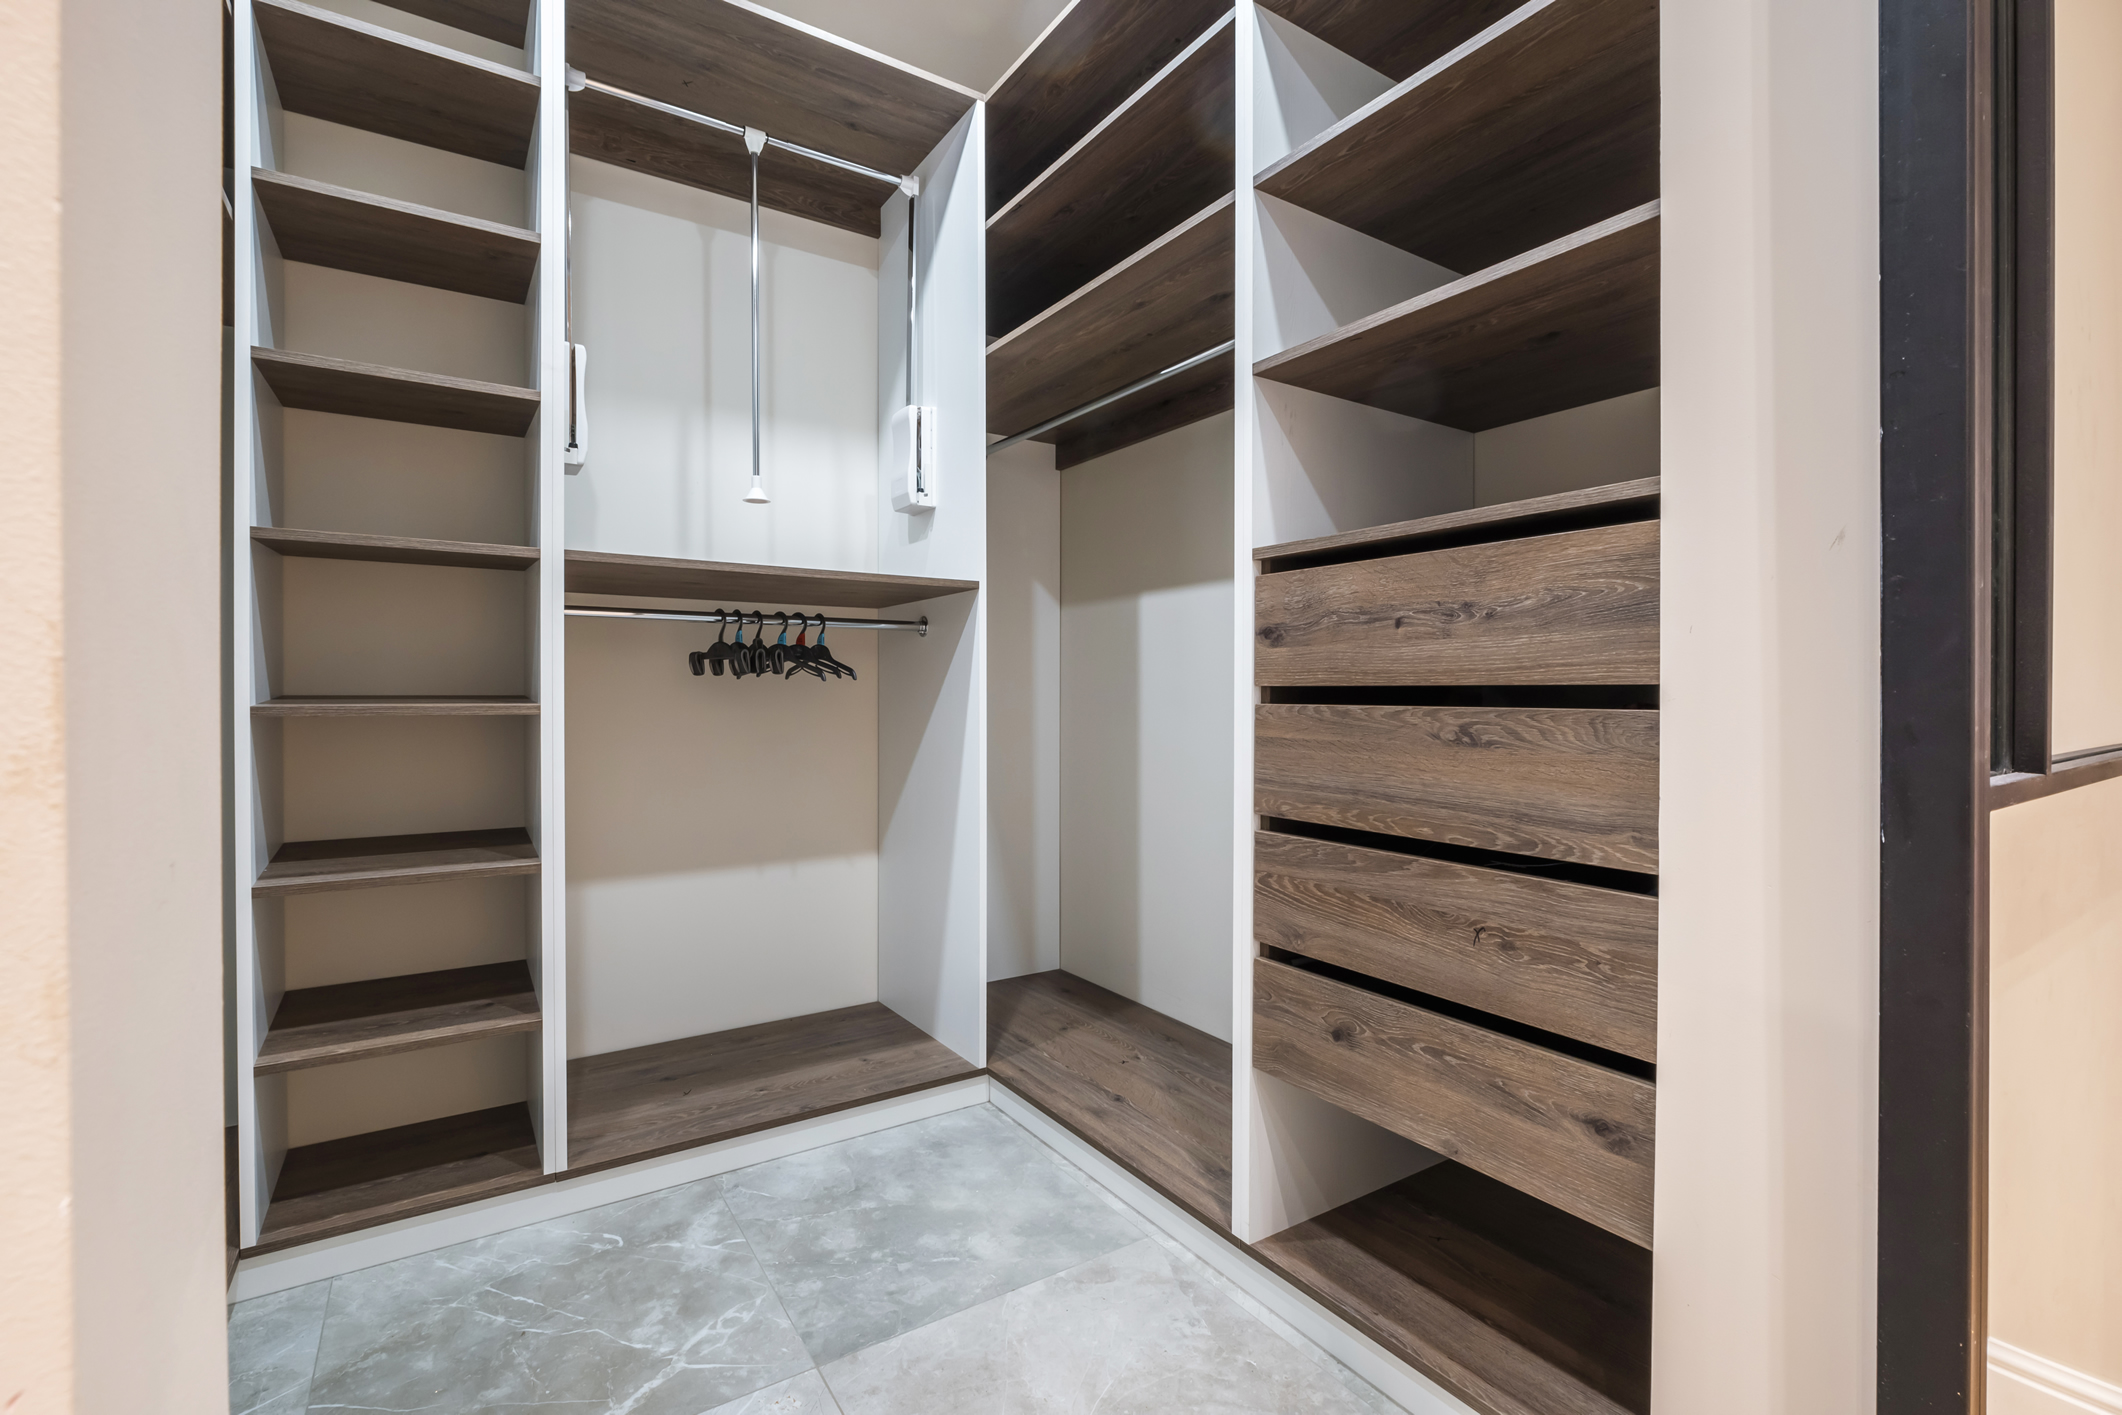 Choosing the Wardrobe Options for Your Home